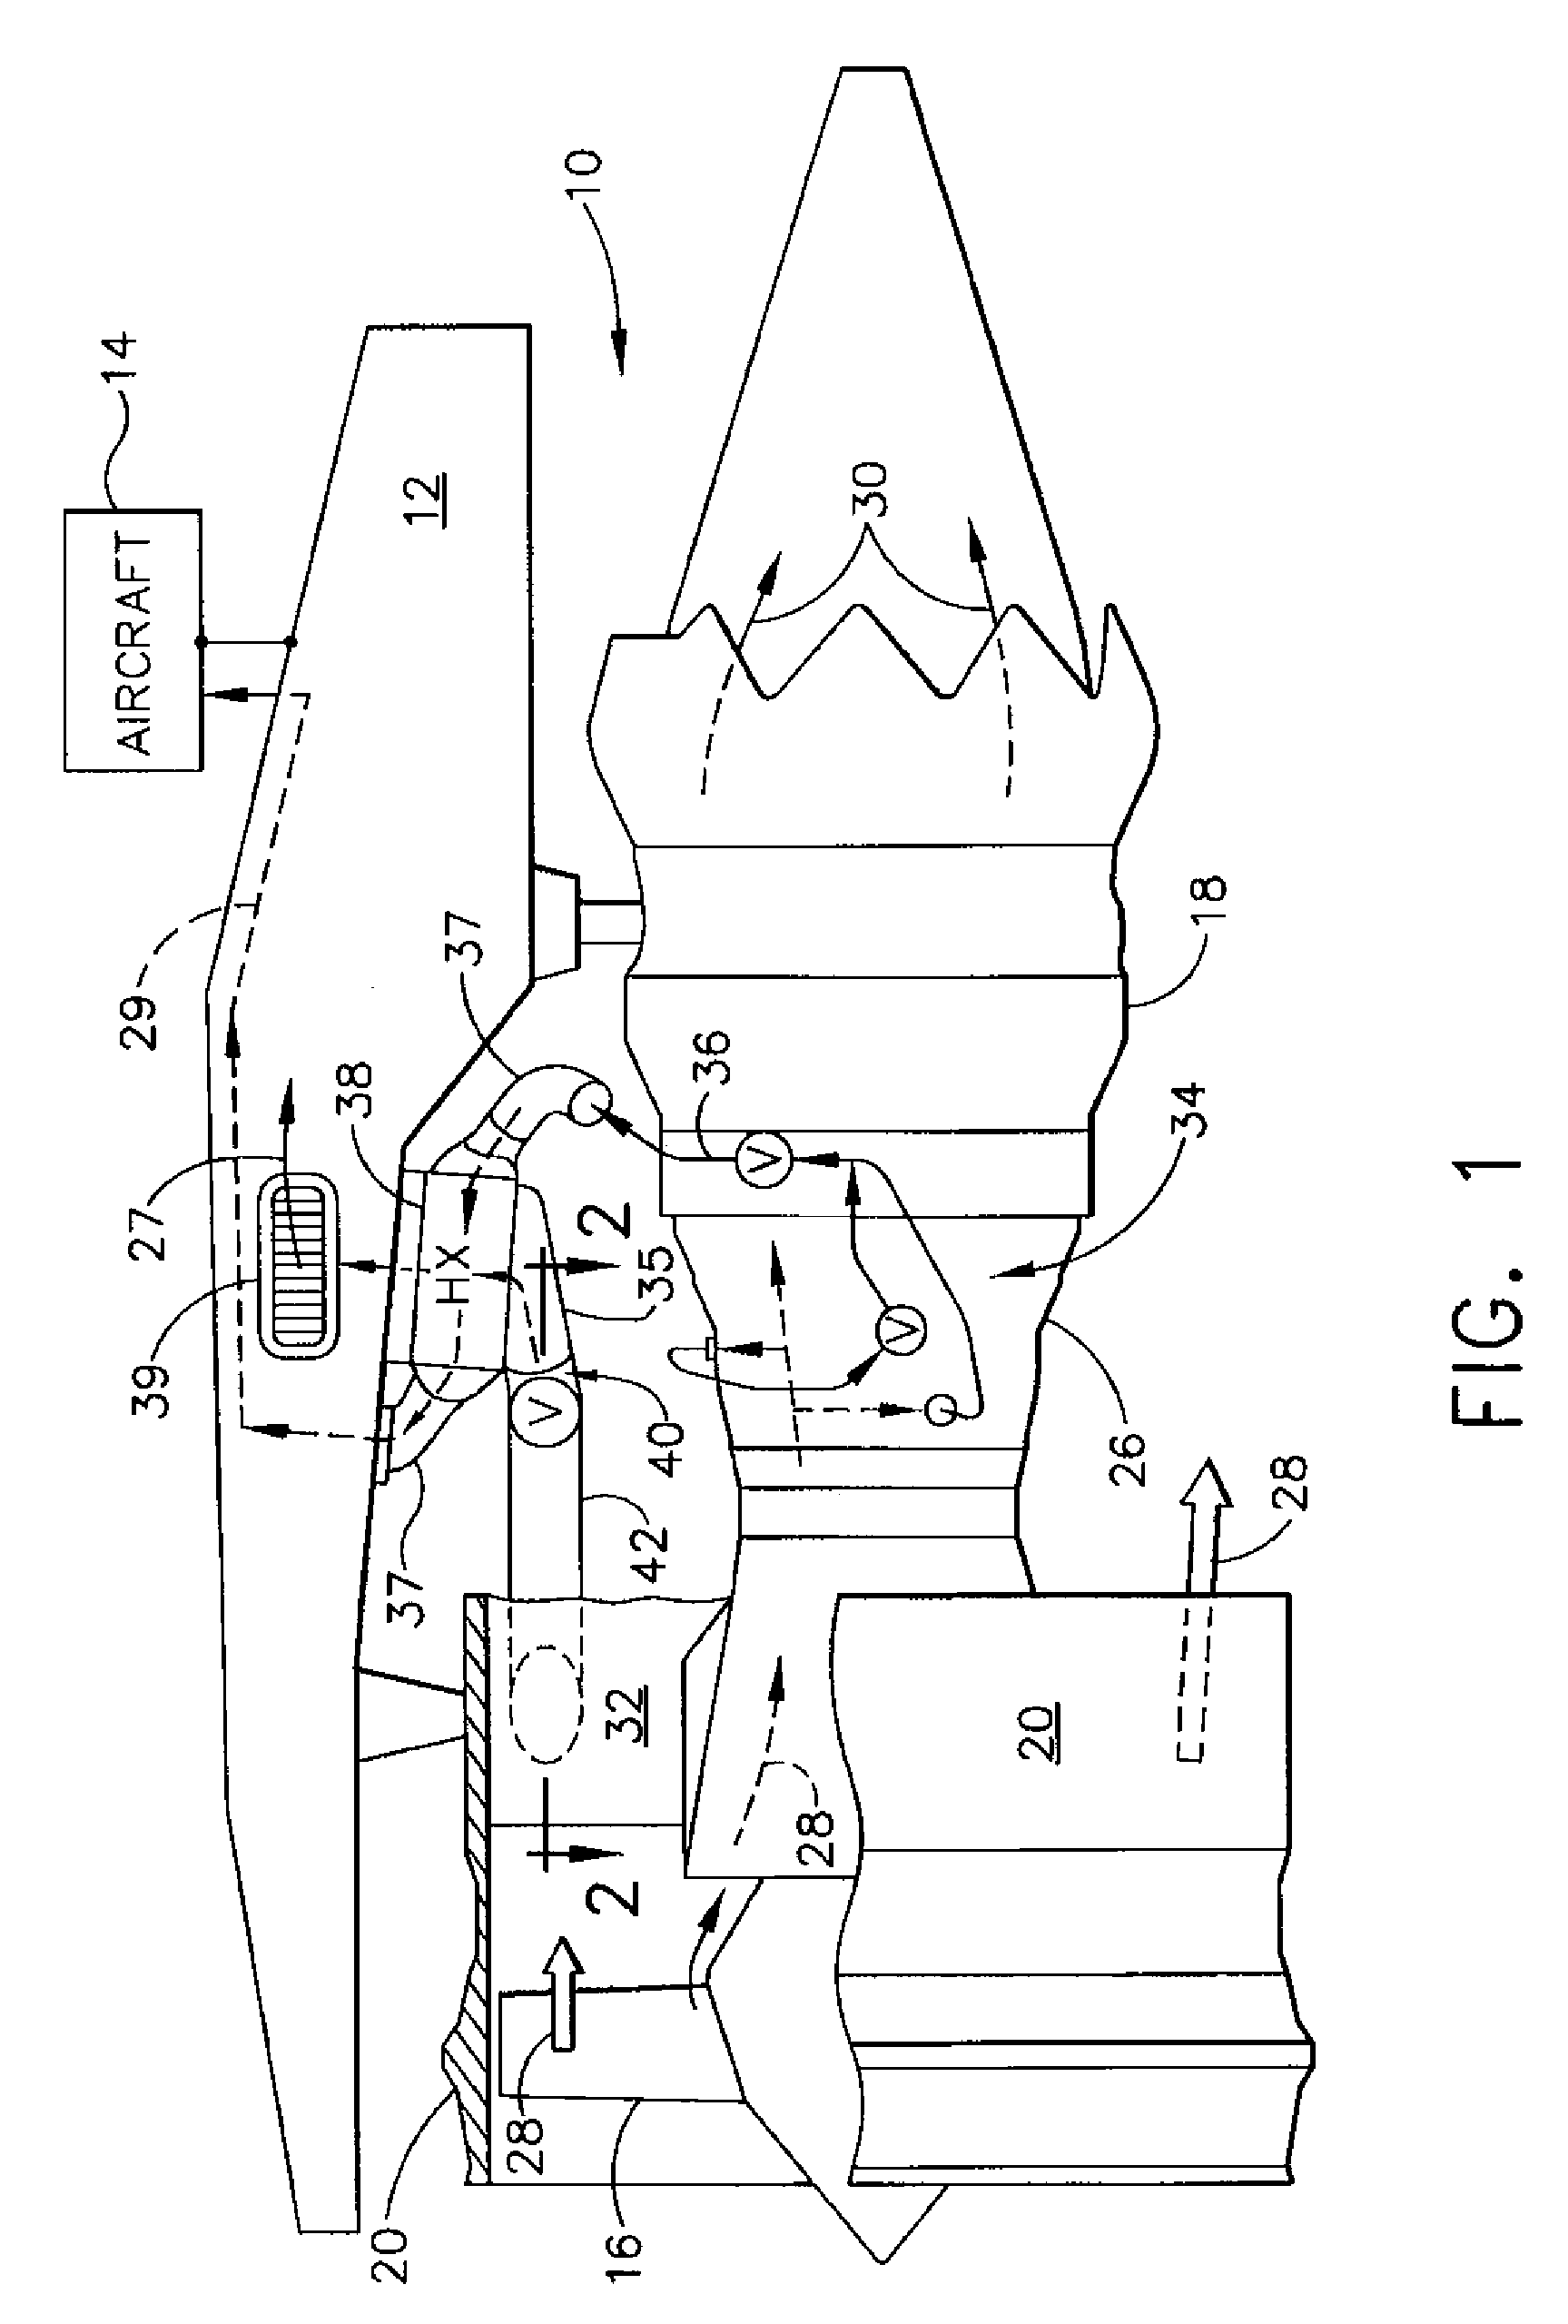 Apparatus and method for suppressing dynamic pressure instability in bleed duct